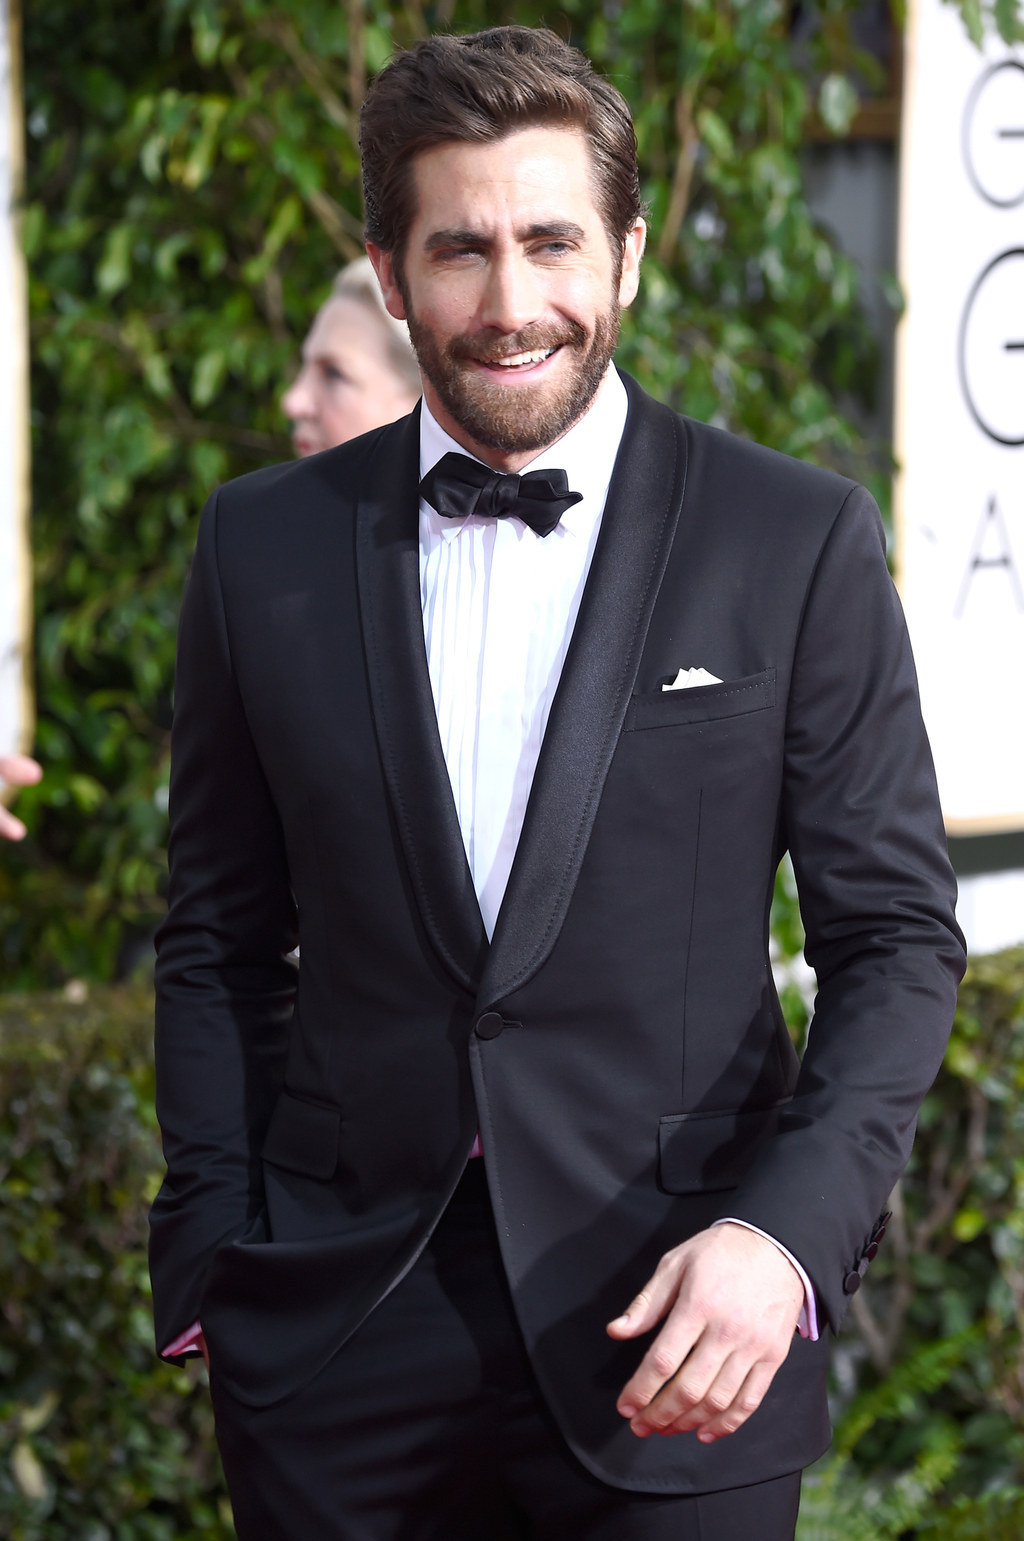 Jake Gyllenhaal's Details Cover Will Make You Weep